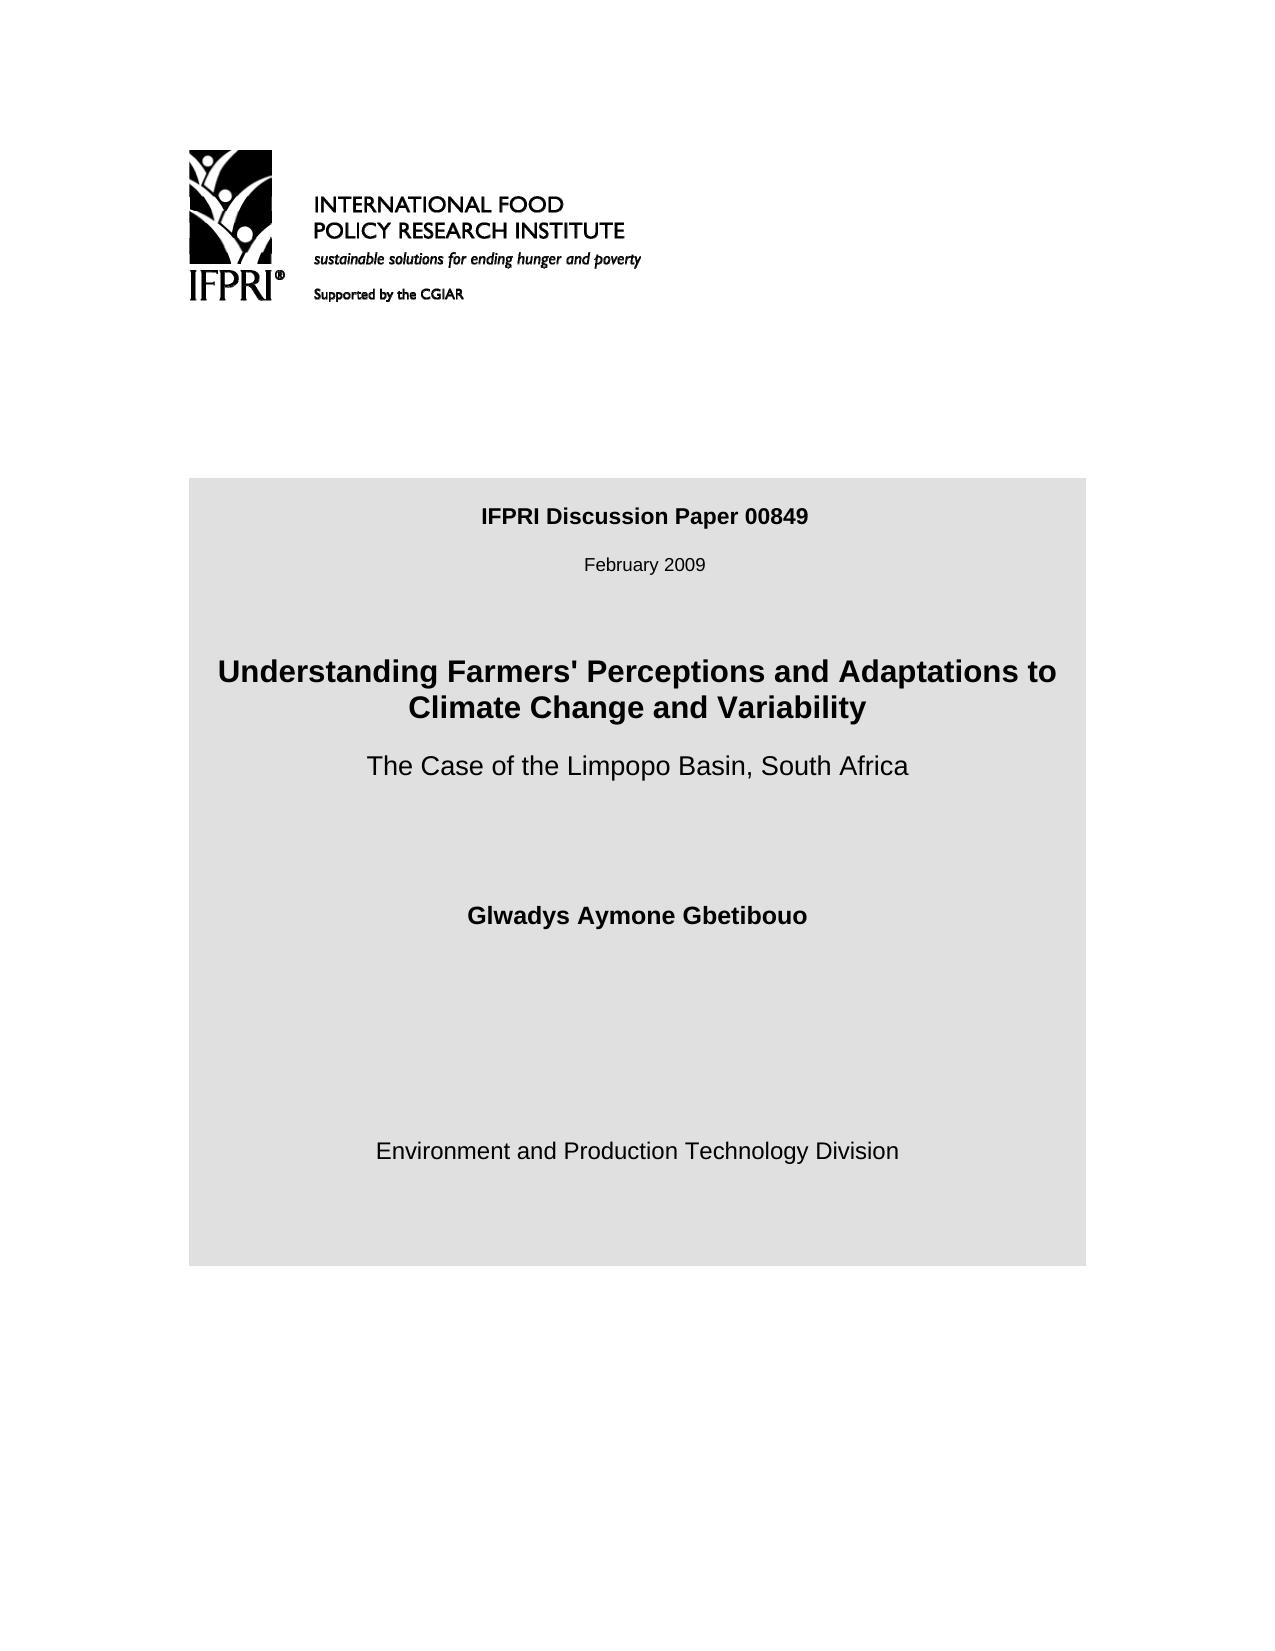 Understanding Farmers' Perceptions and Adaptations to Climate Change and Variability: The Case of the Limpopo Basin, South Africa